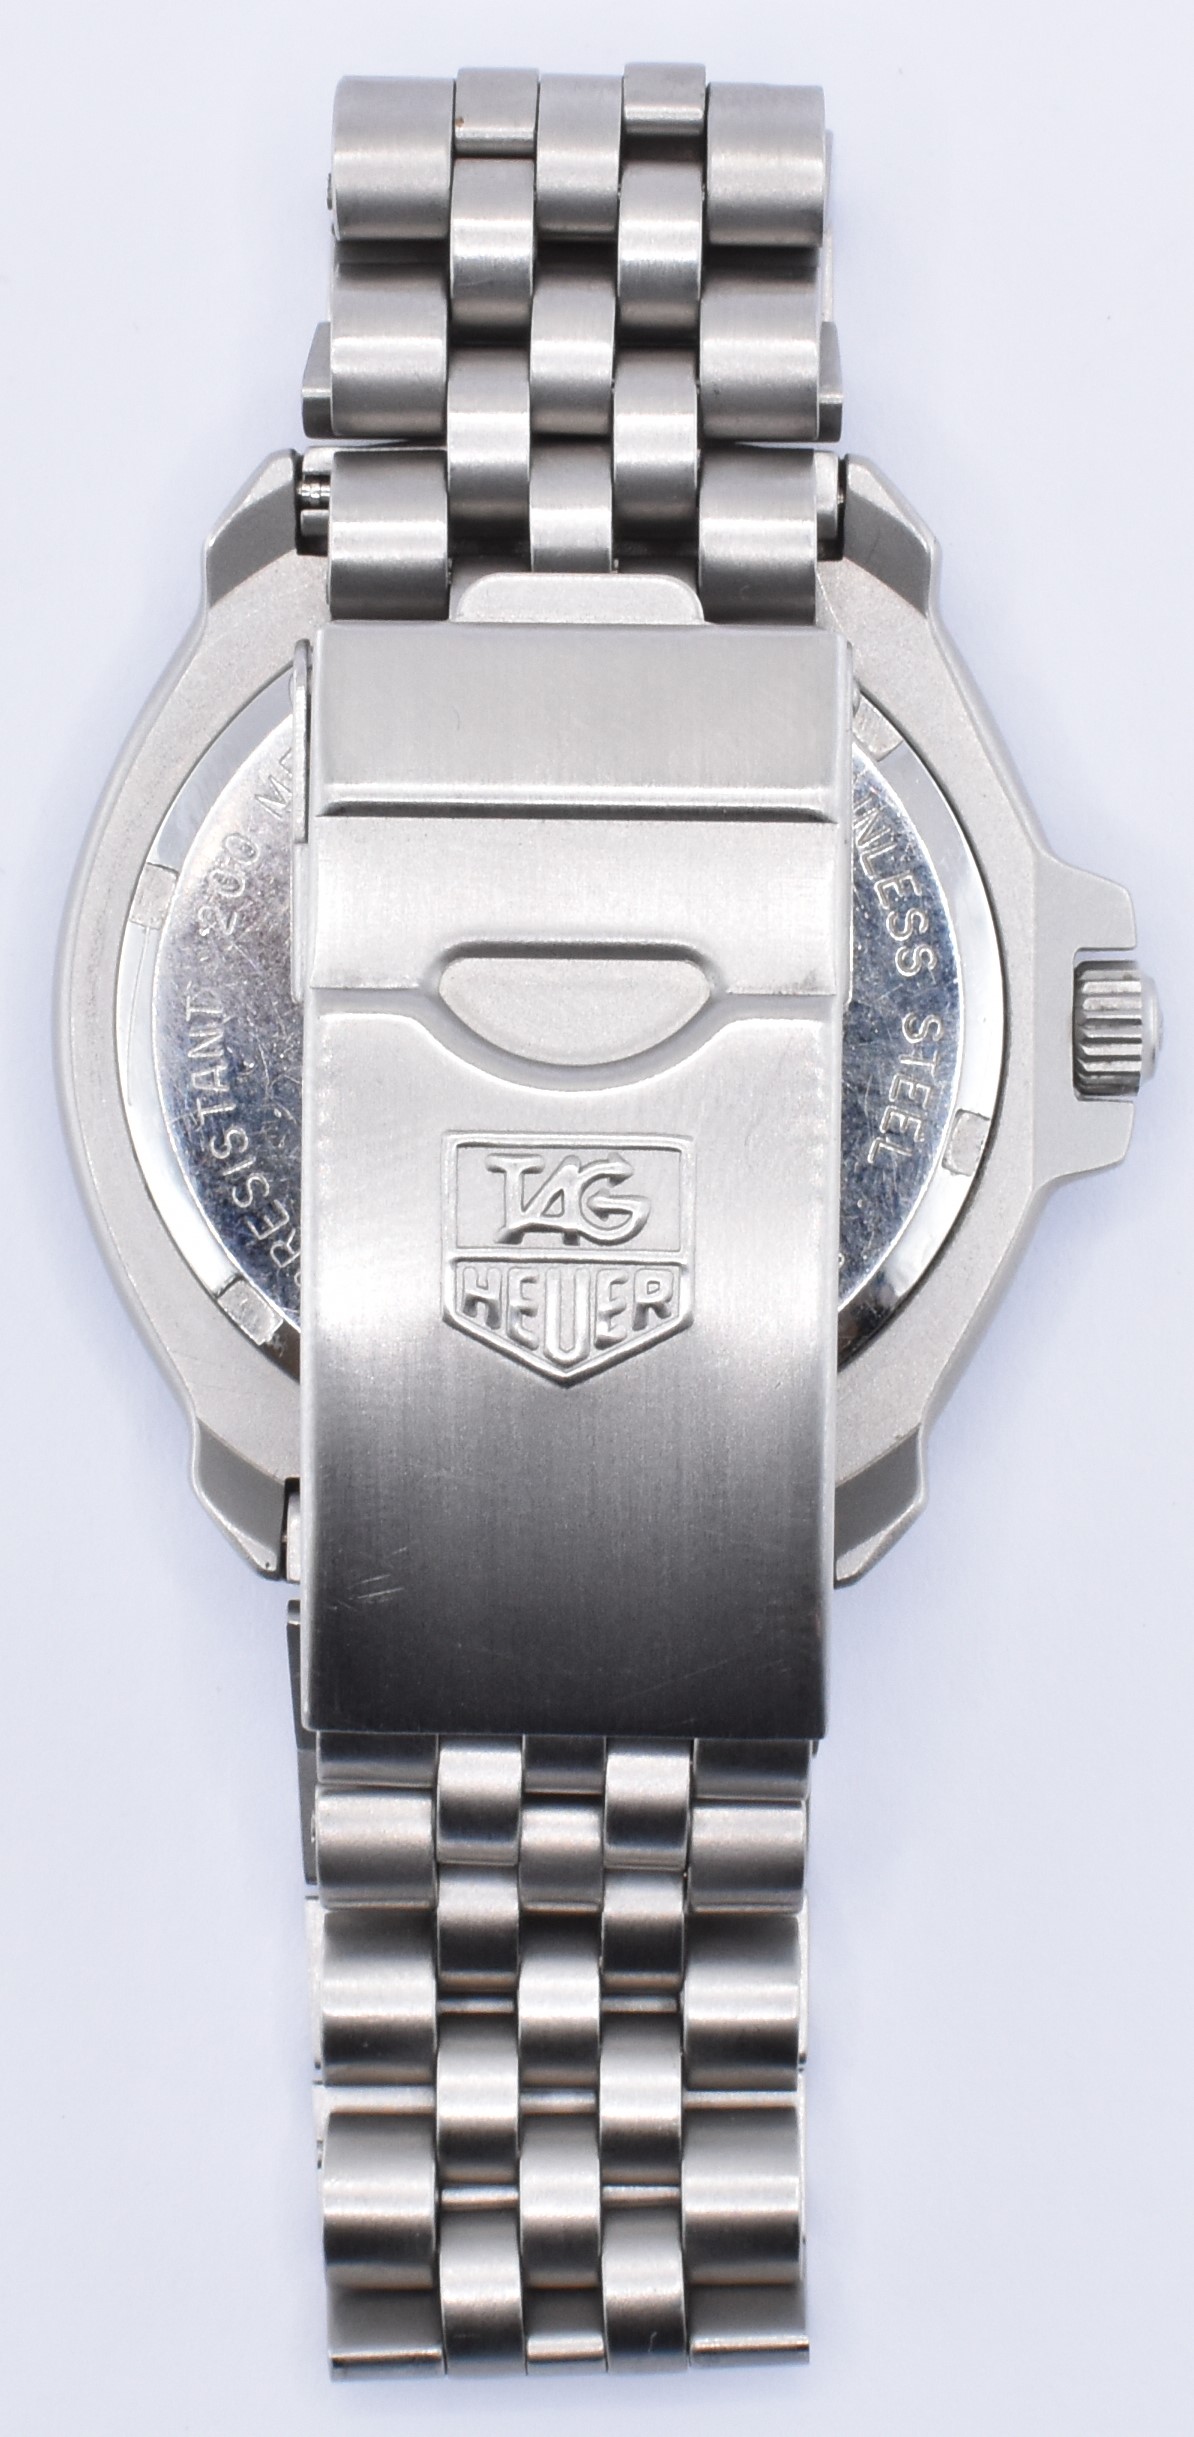 TAG HEUER STAINLESS STEEL DIVERS WATCH - Image 3 of 5